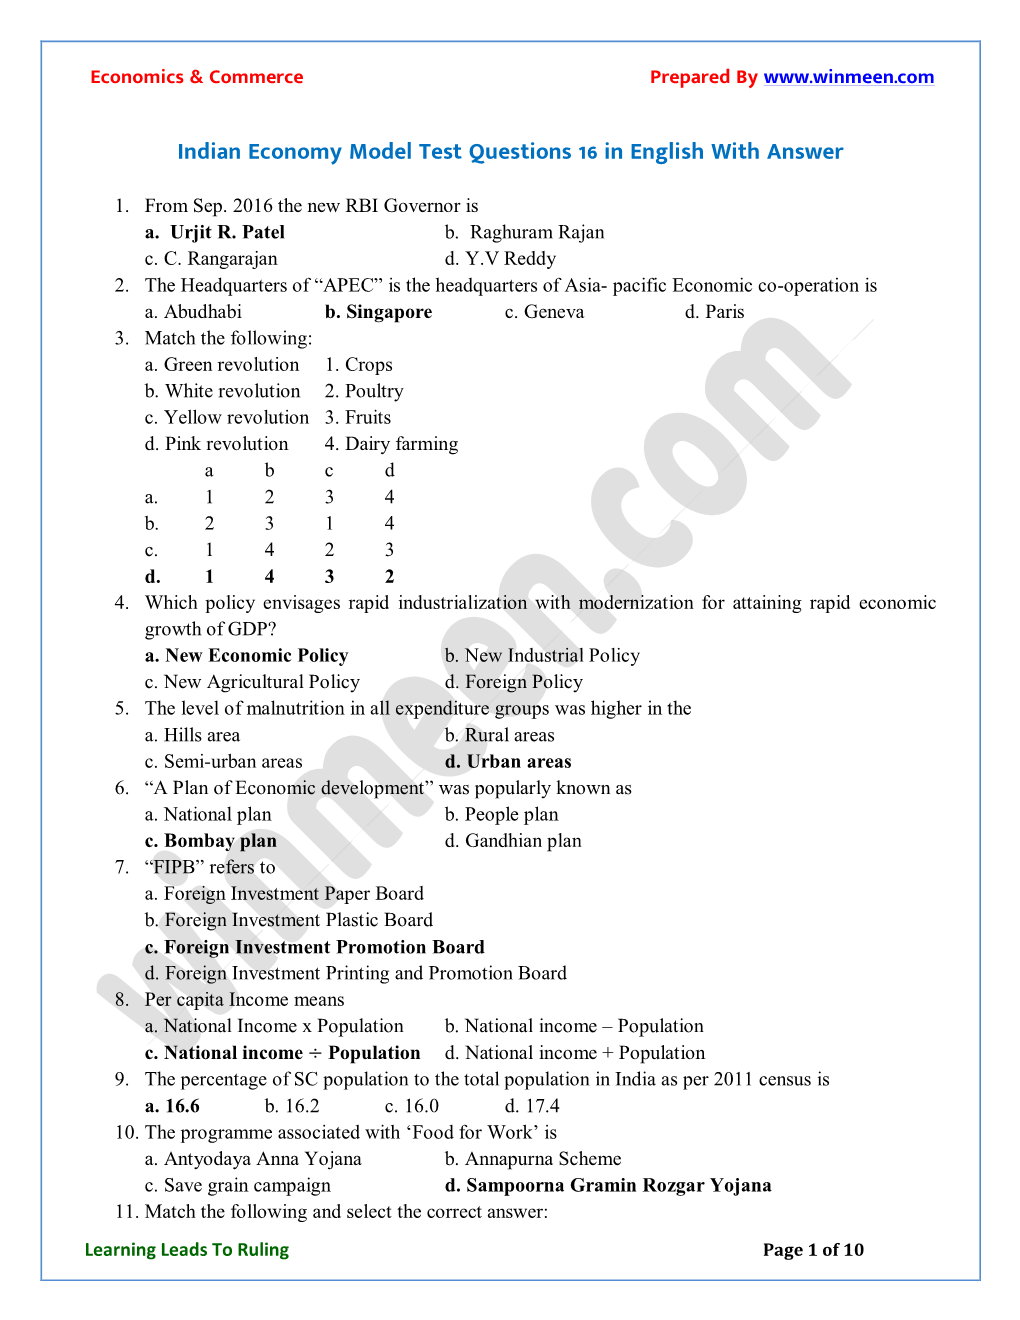 Indian Economy Model Test Questions 16 in English with Answer